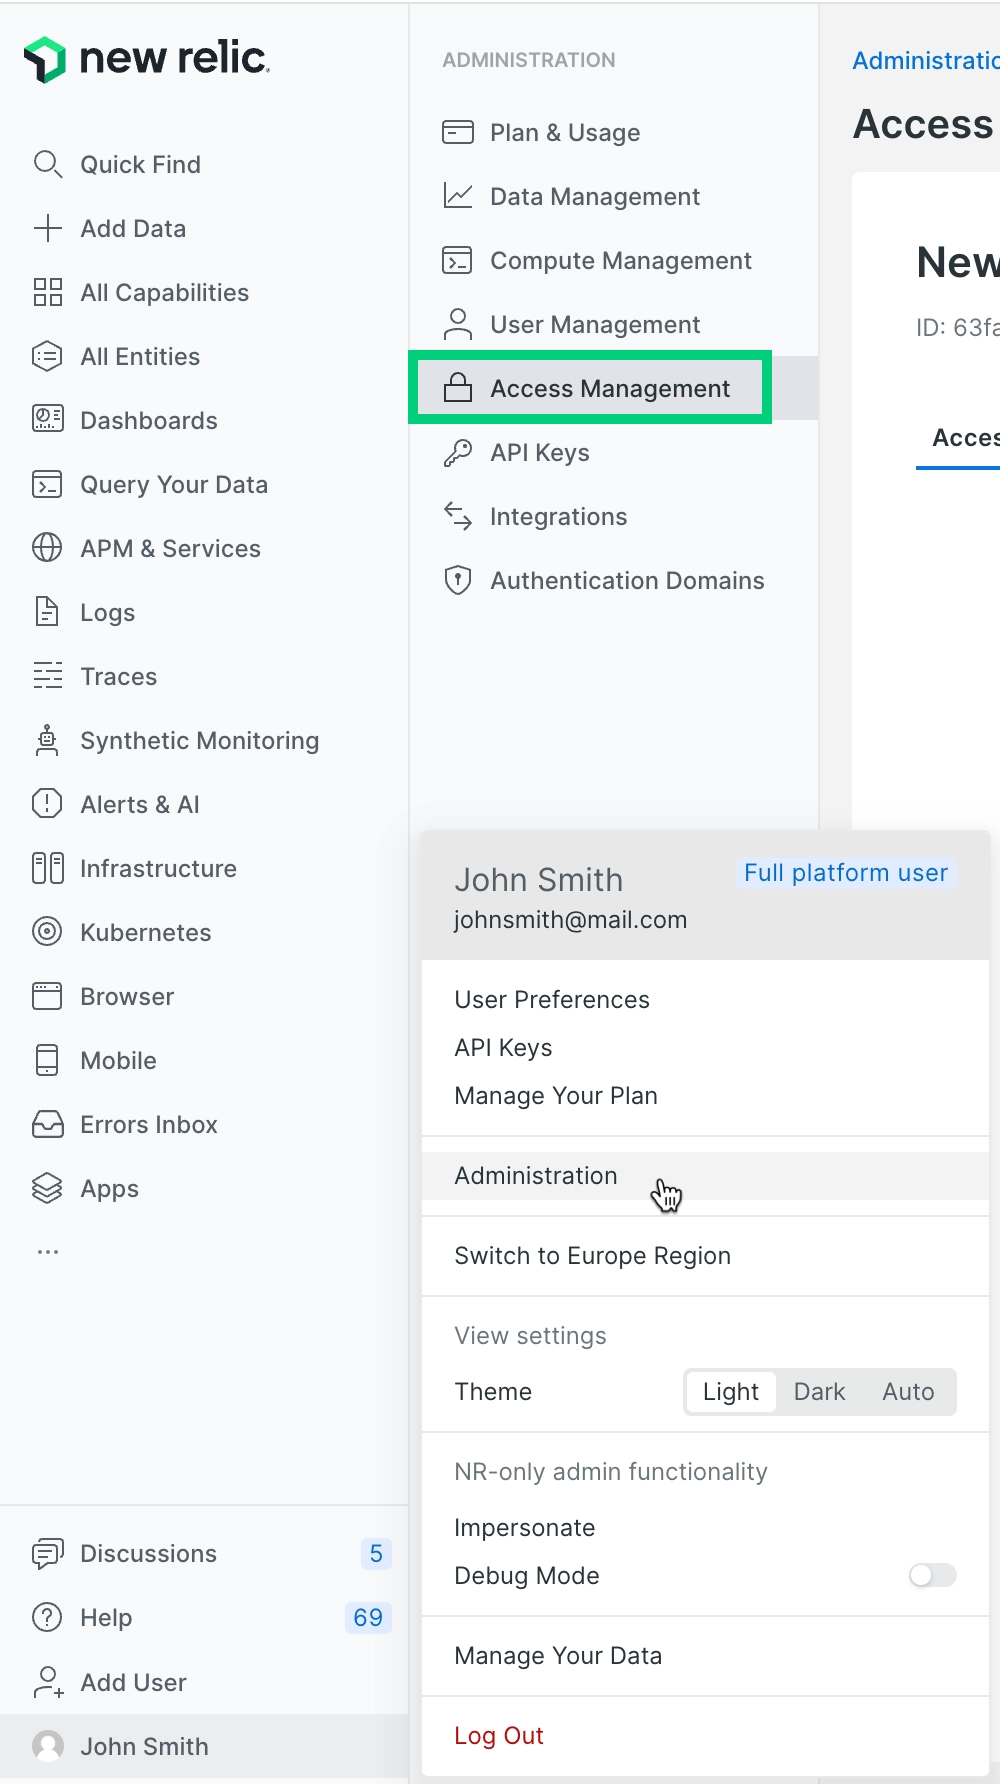 New Relic user mgmt groups UI - default group assignments